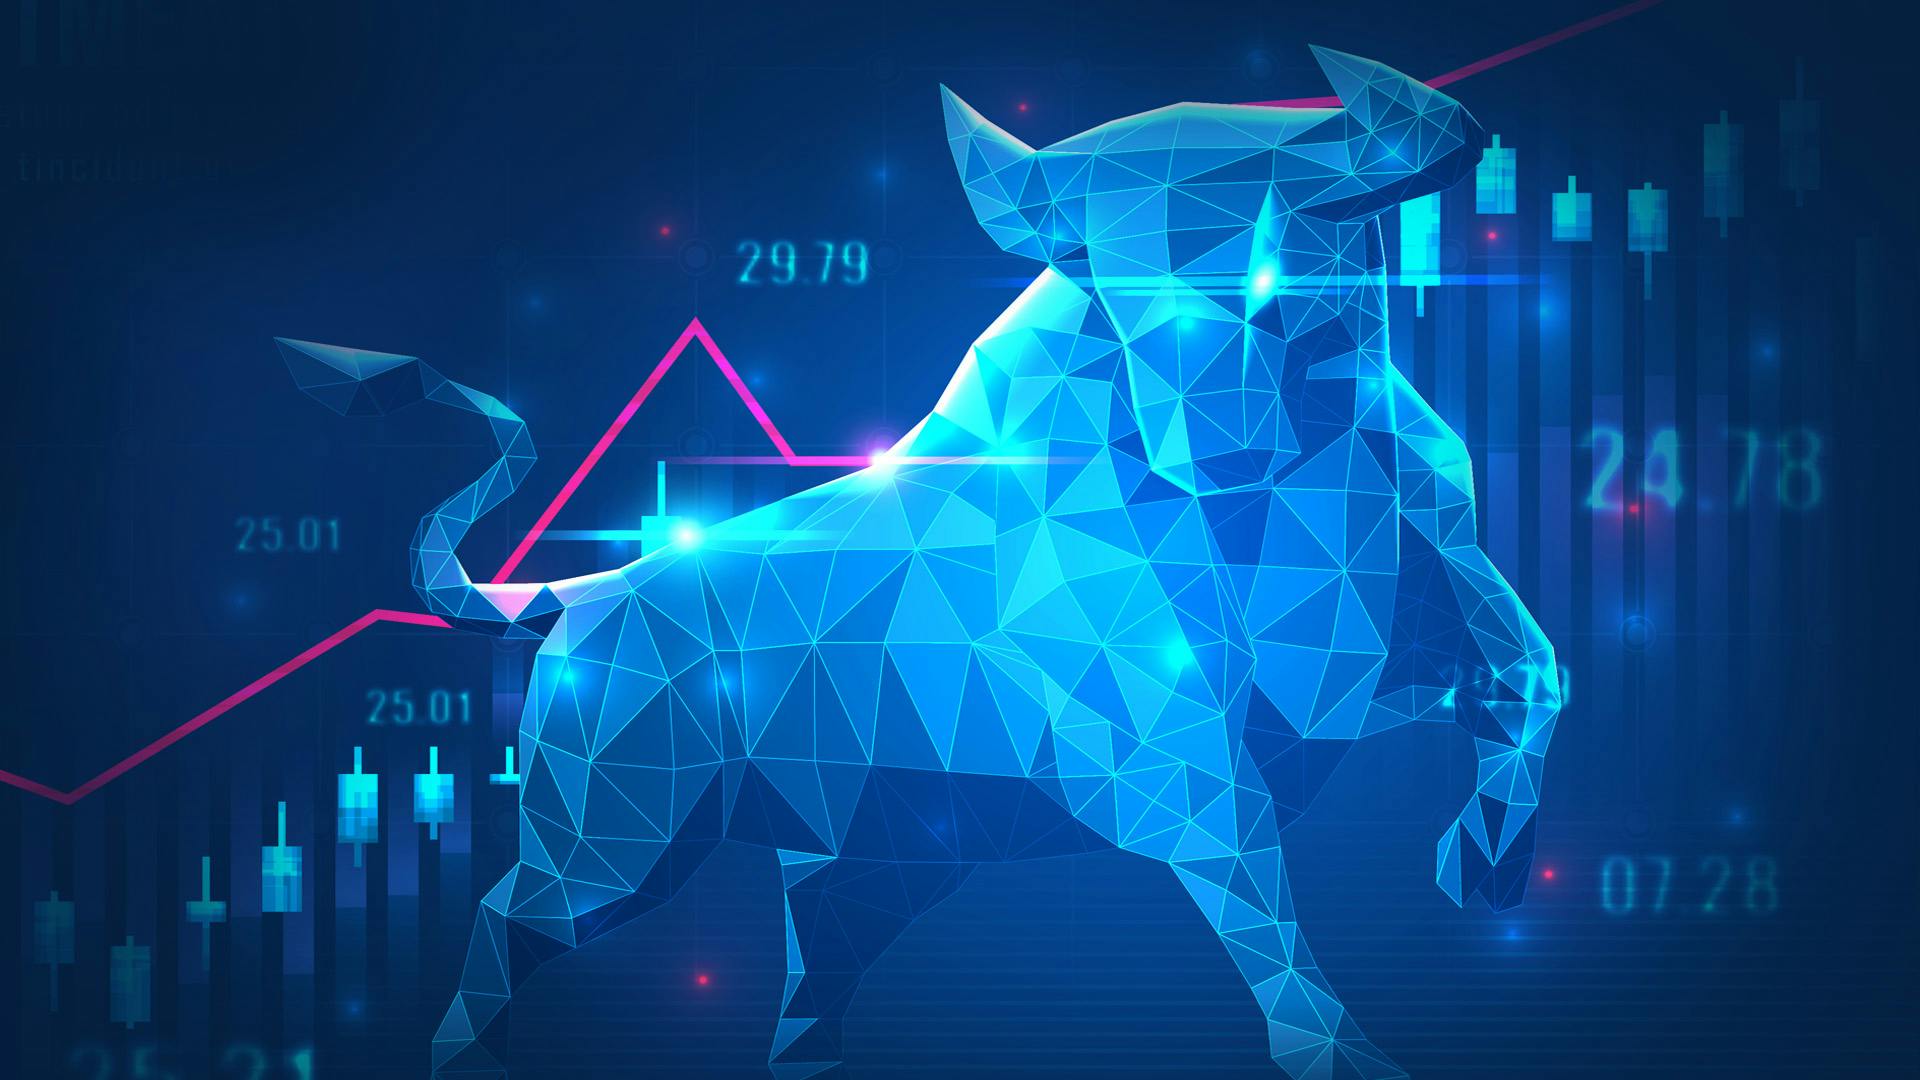 4 Reasons To Be Bullish On Crypto (And 4 Not To Be)